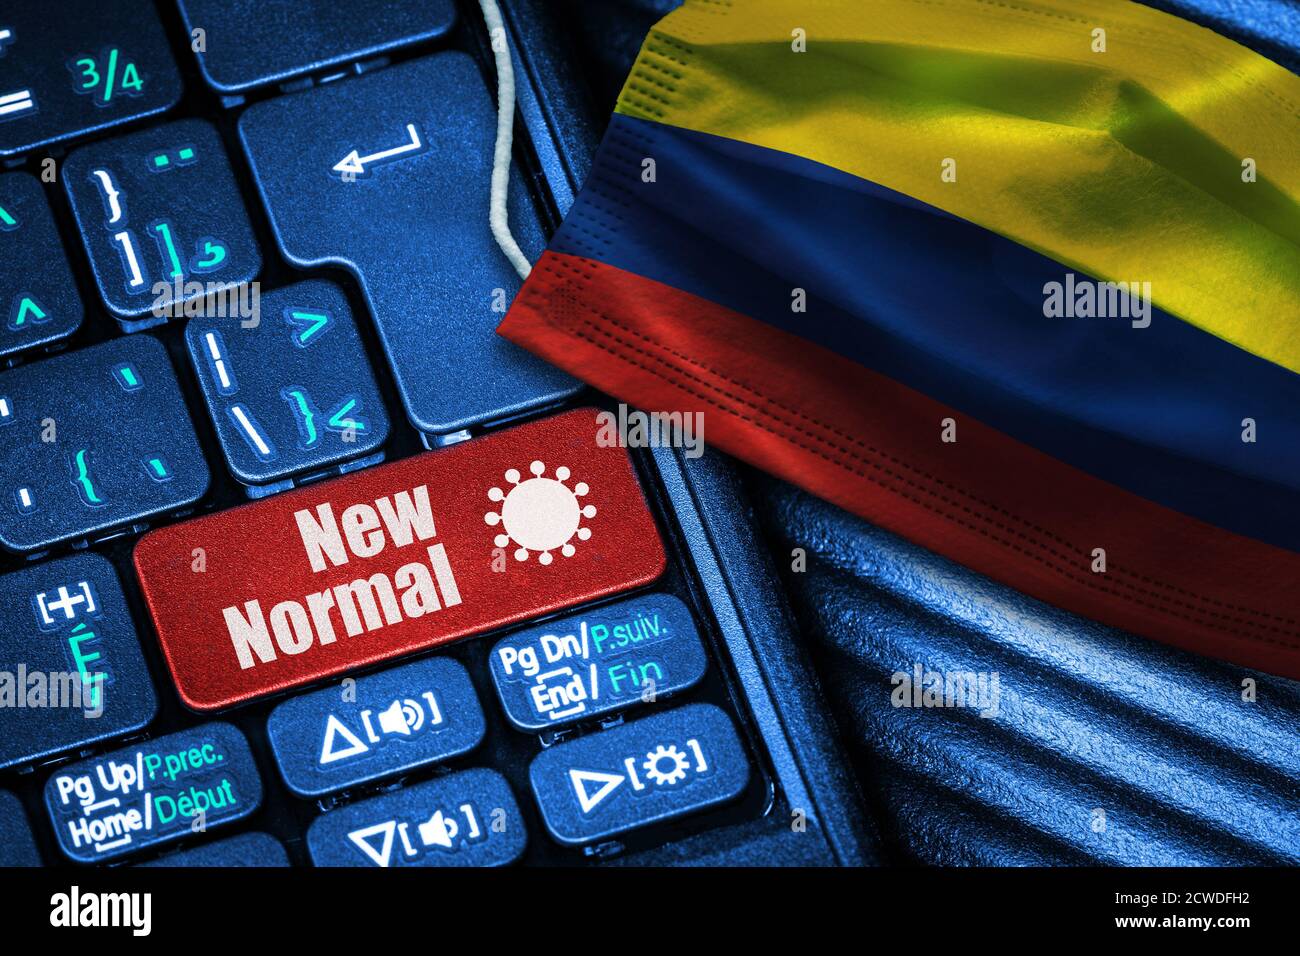 Concept of New Normal in Colombia during Covid-19 with computer keyboard red button text and face mask showing Colombian Flag. Stock Photo